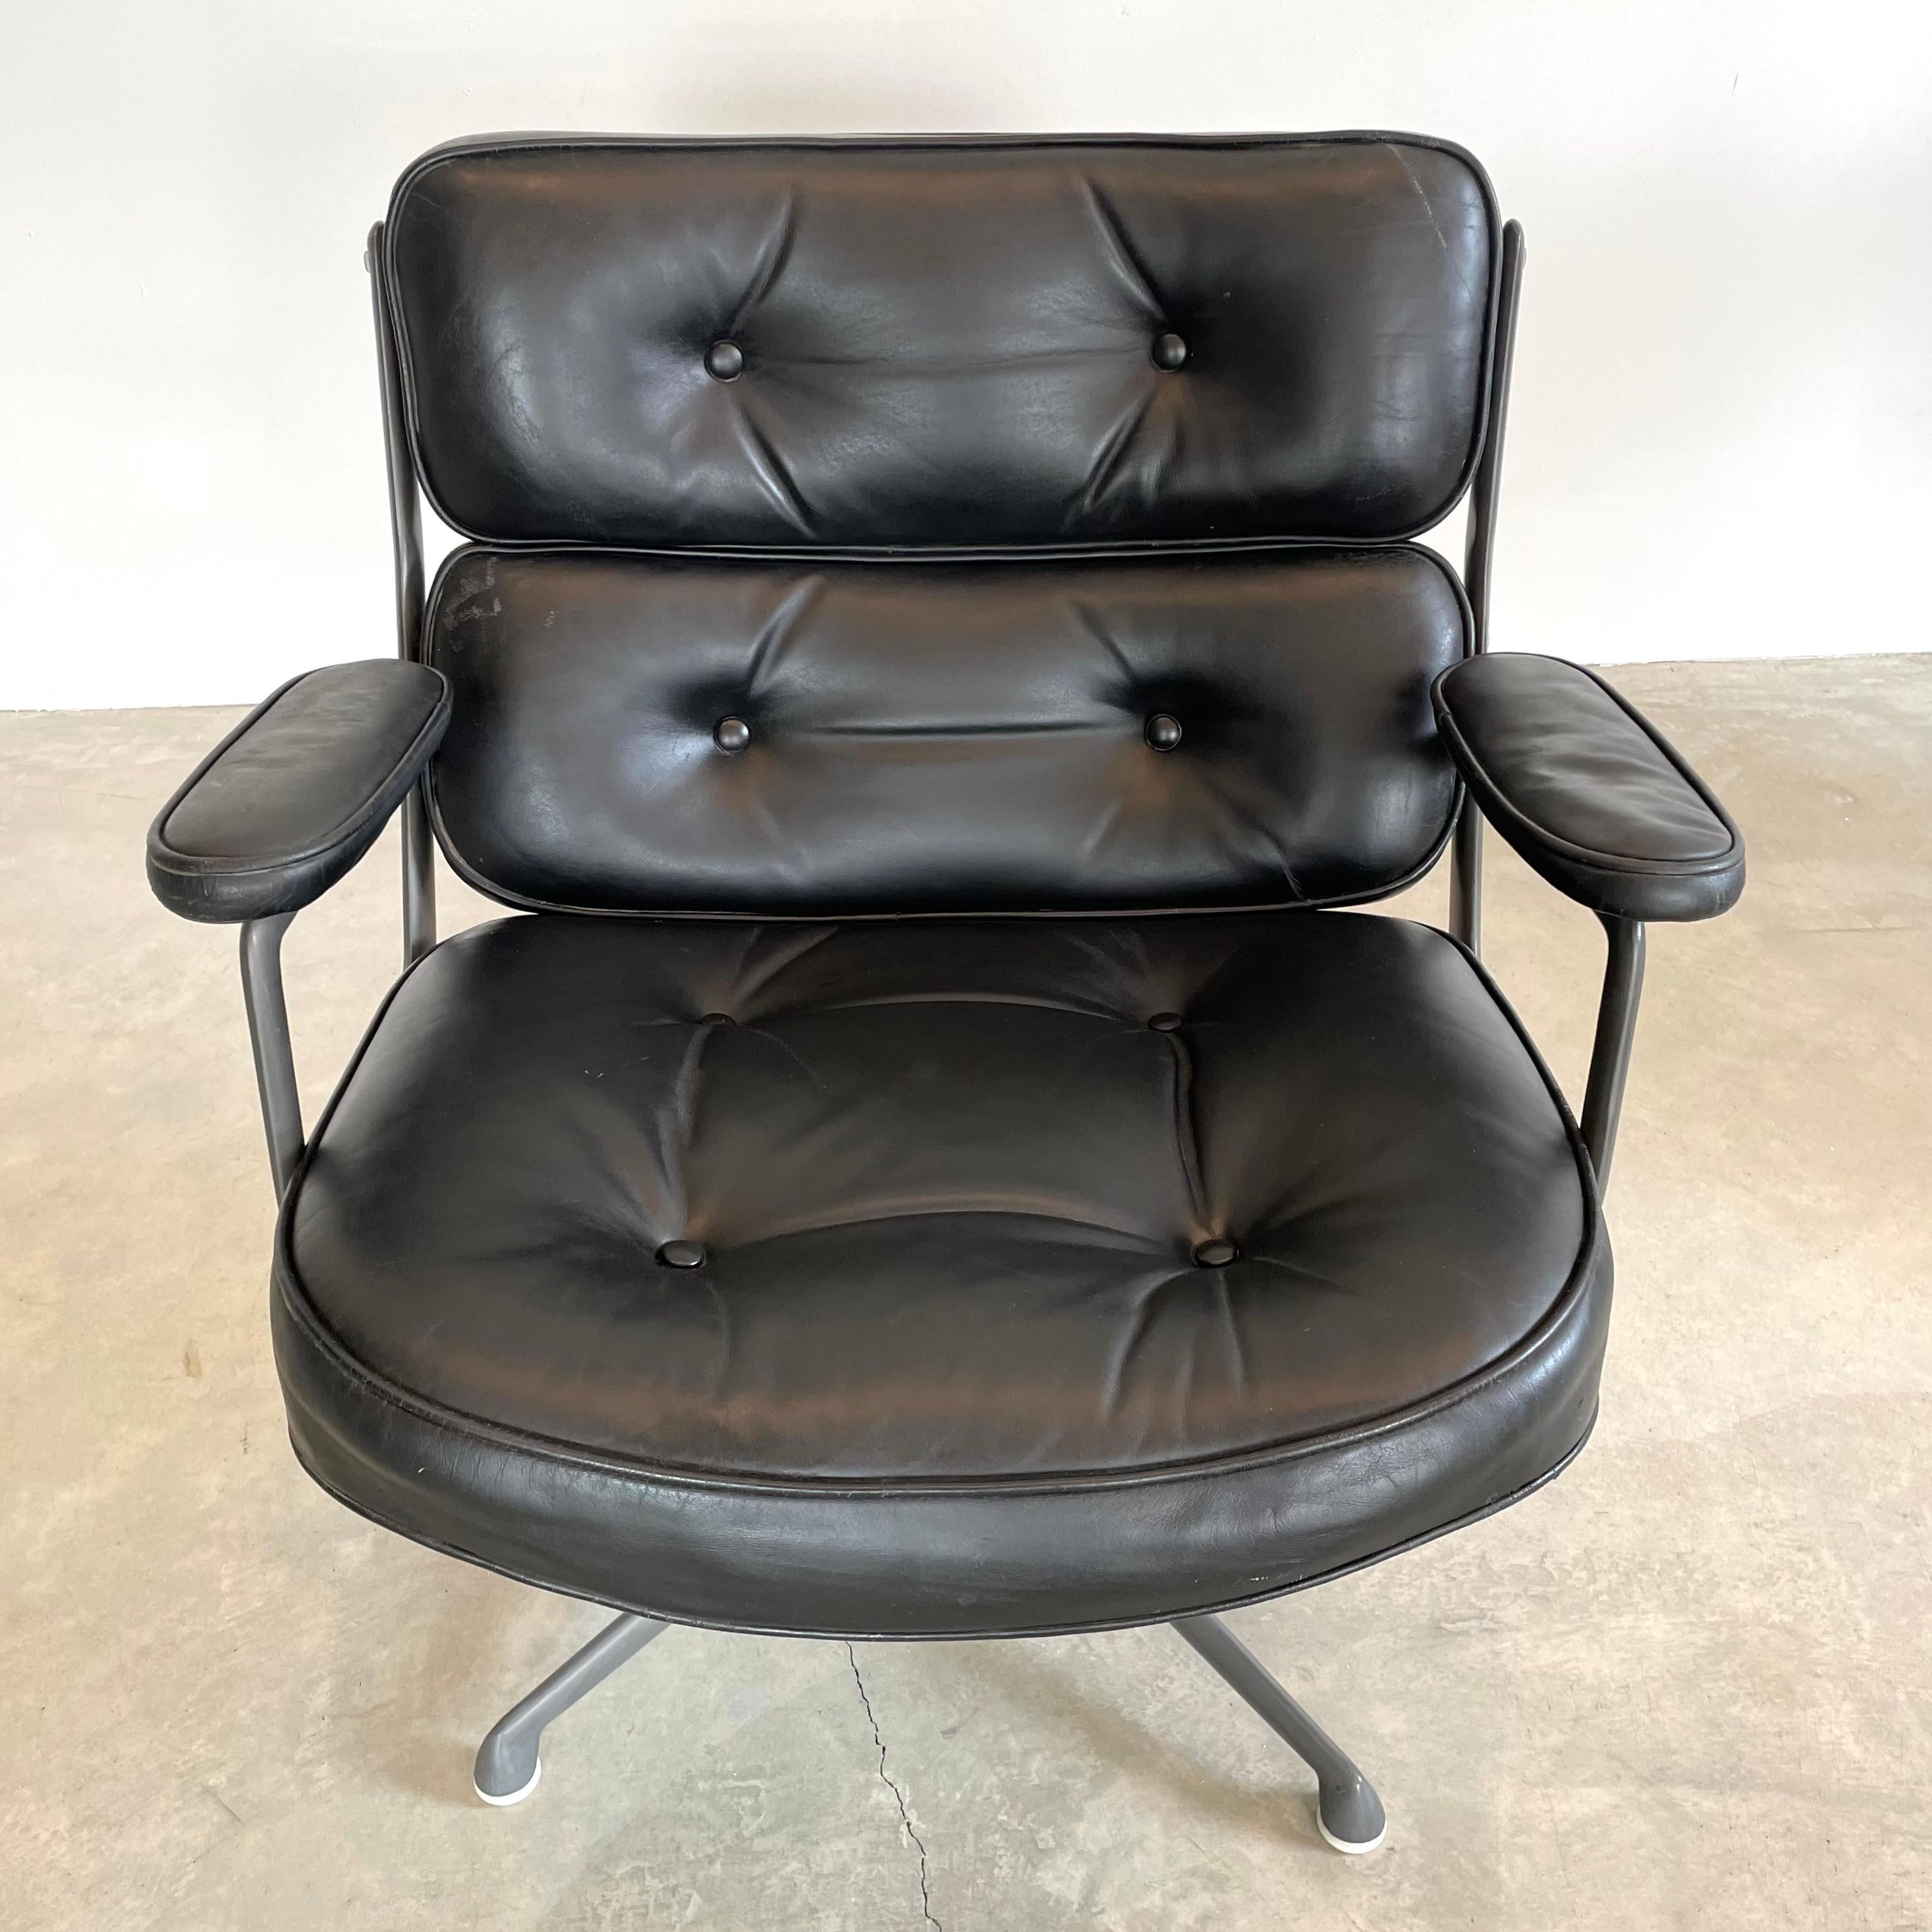 Eames Time Life Lobby Lounge Chair in Black Leather for Herman Miller, 1980s USA For Sale 8